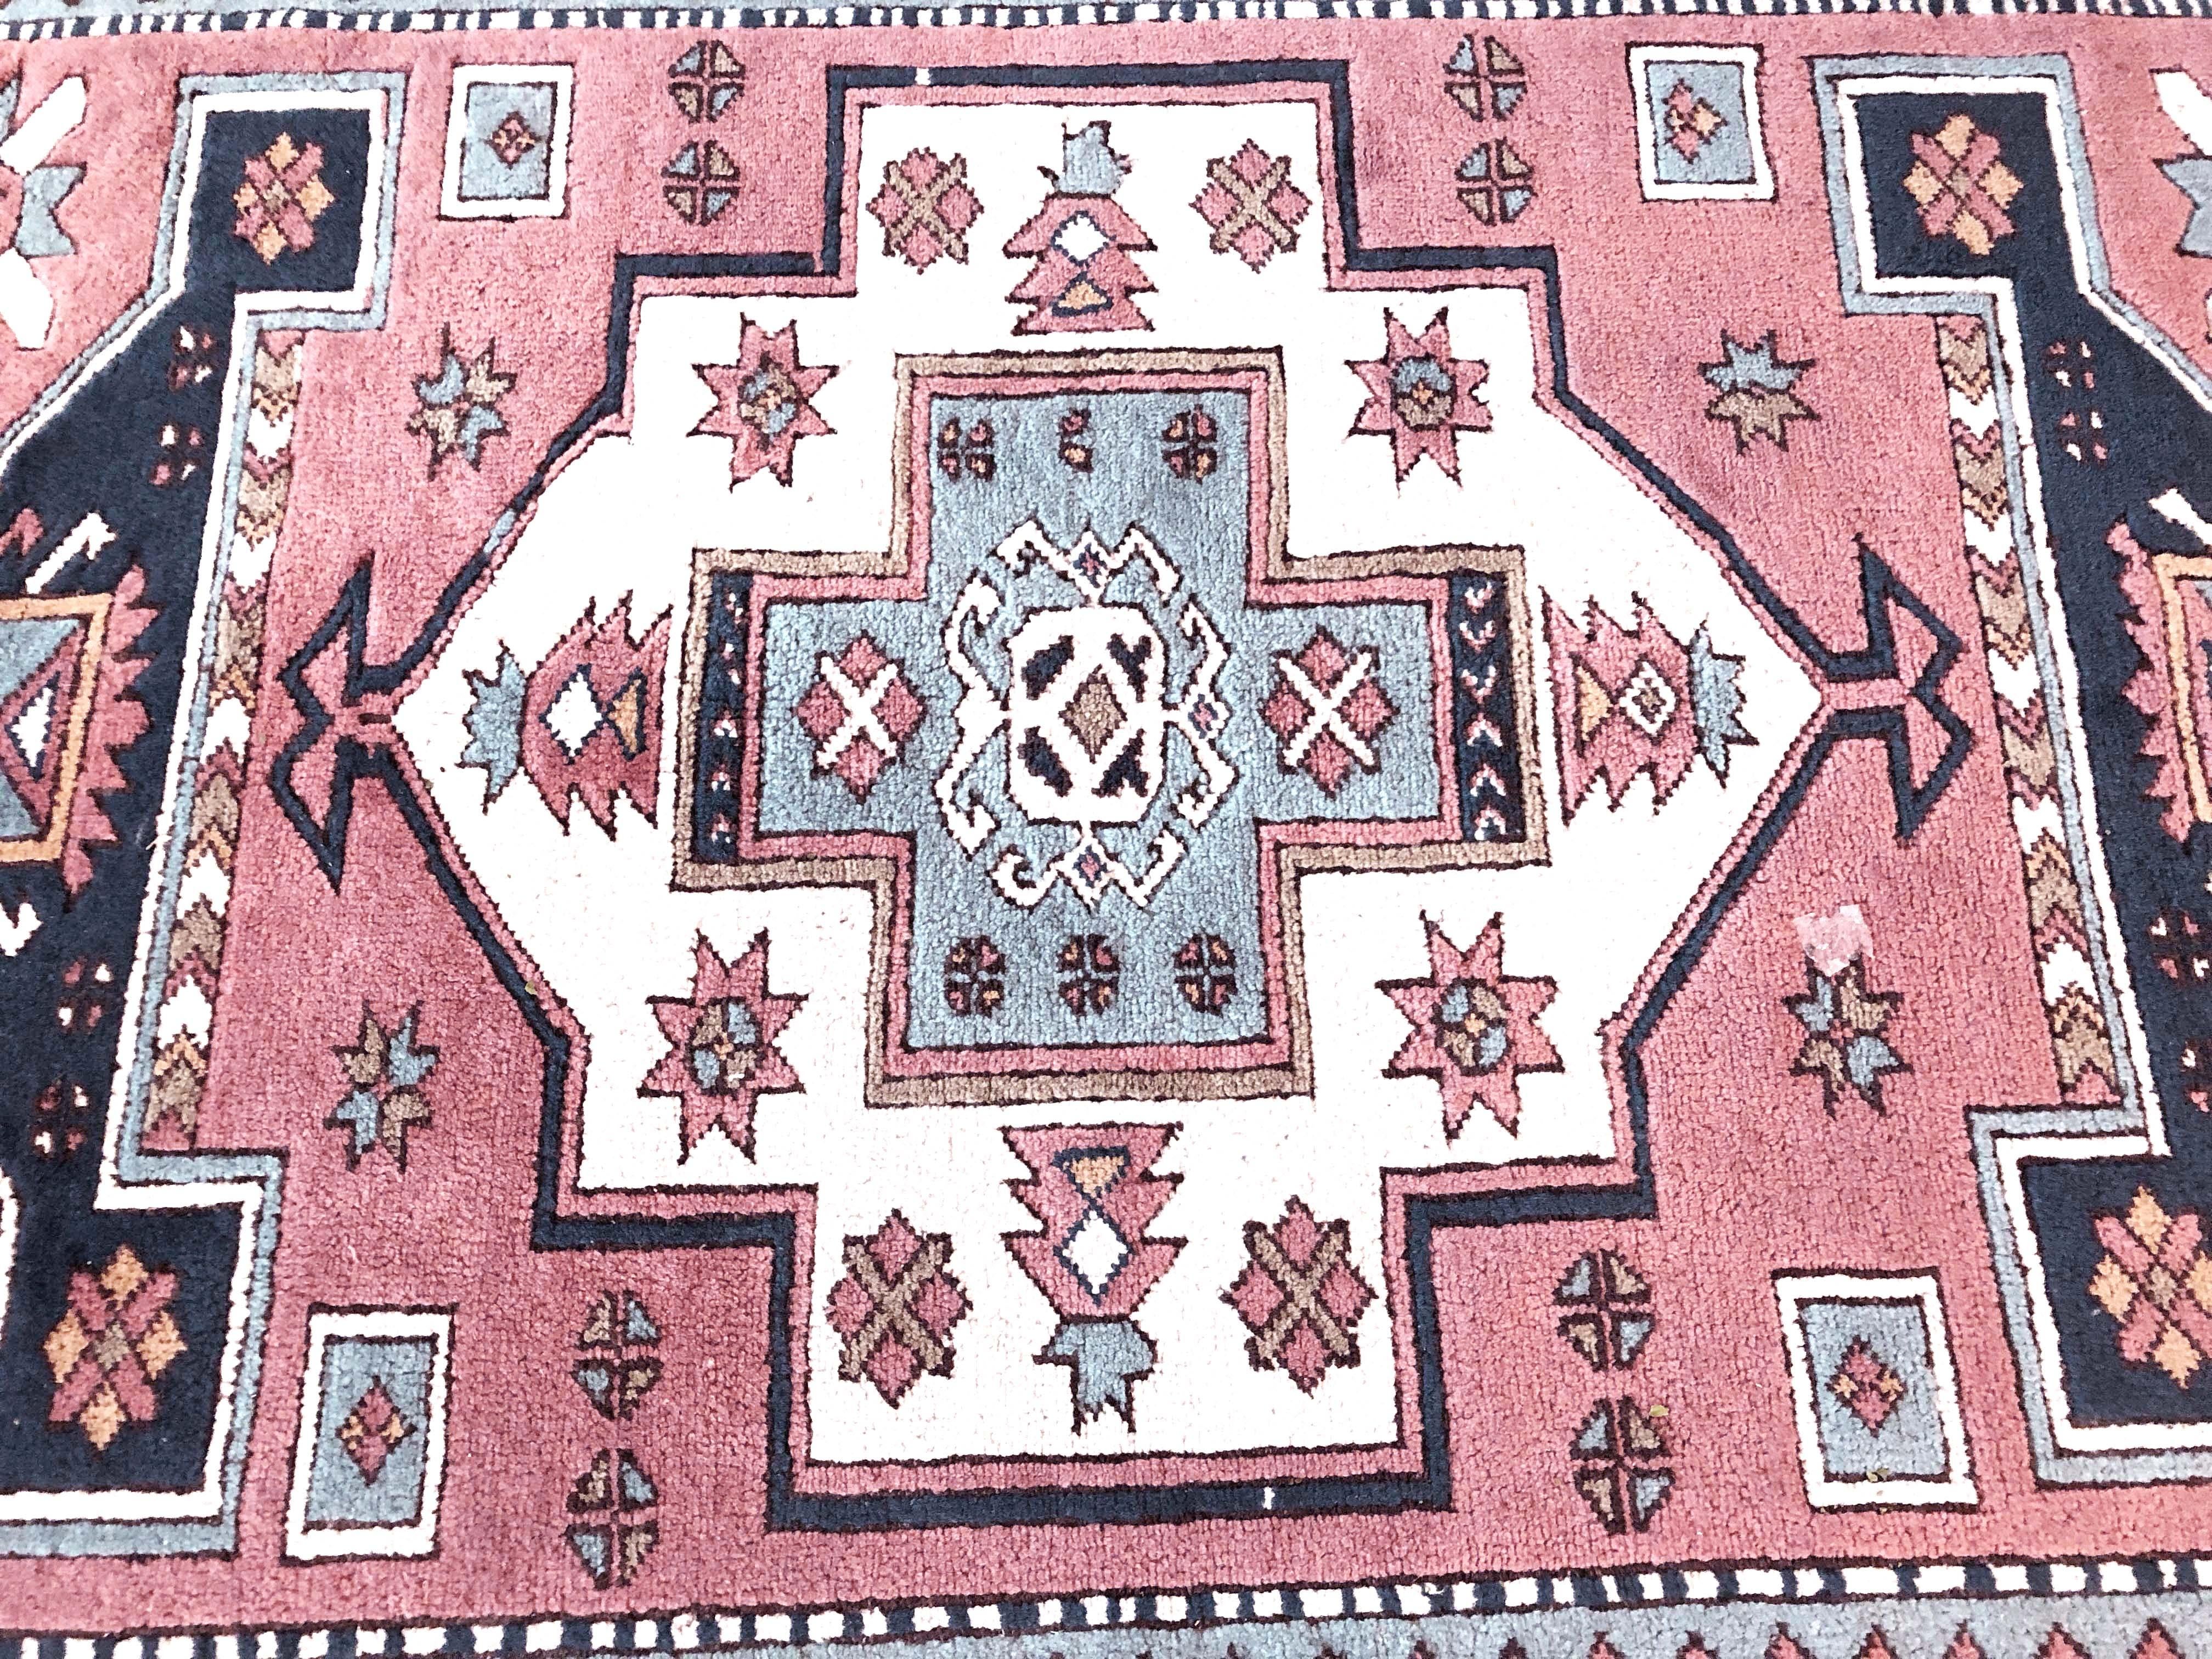 A beautiful rug with traditional Kars motifs, earth tones and pastel colors, produced in Nigde in Eastern Anatolia, Turkey.

One owner. Purchased in 1985. Wool on wool.

Please note: 6 ft x 8 ft dimensions exclude the braided fringe.